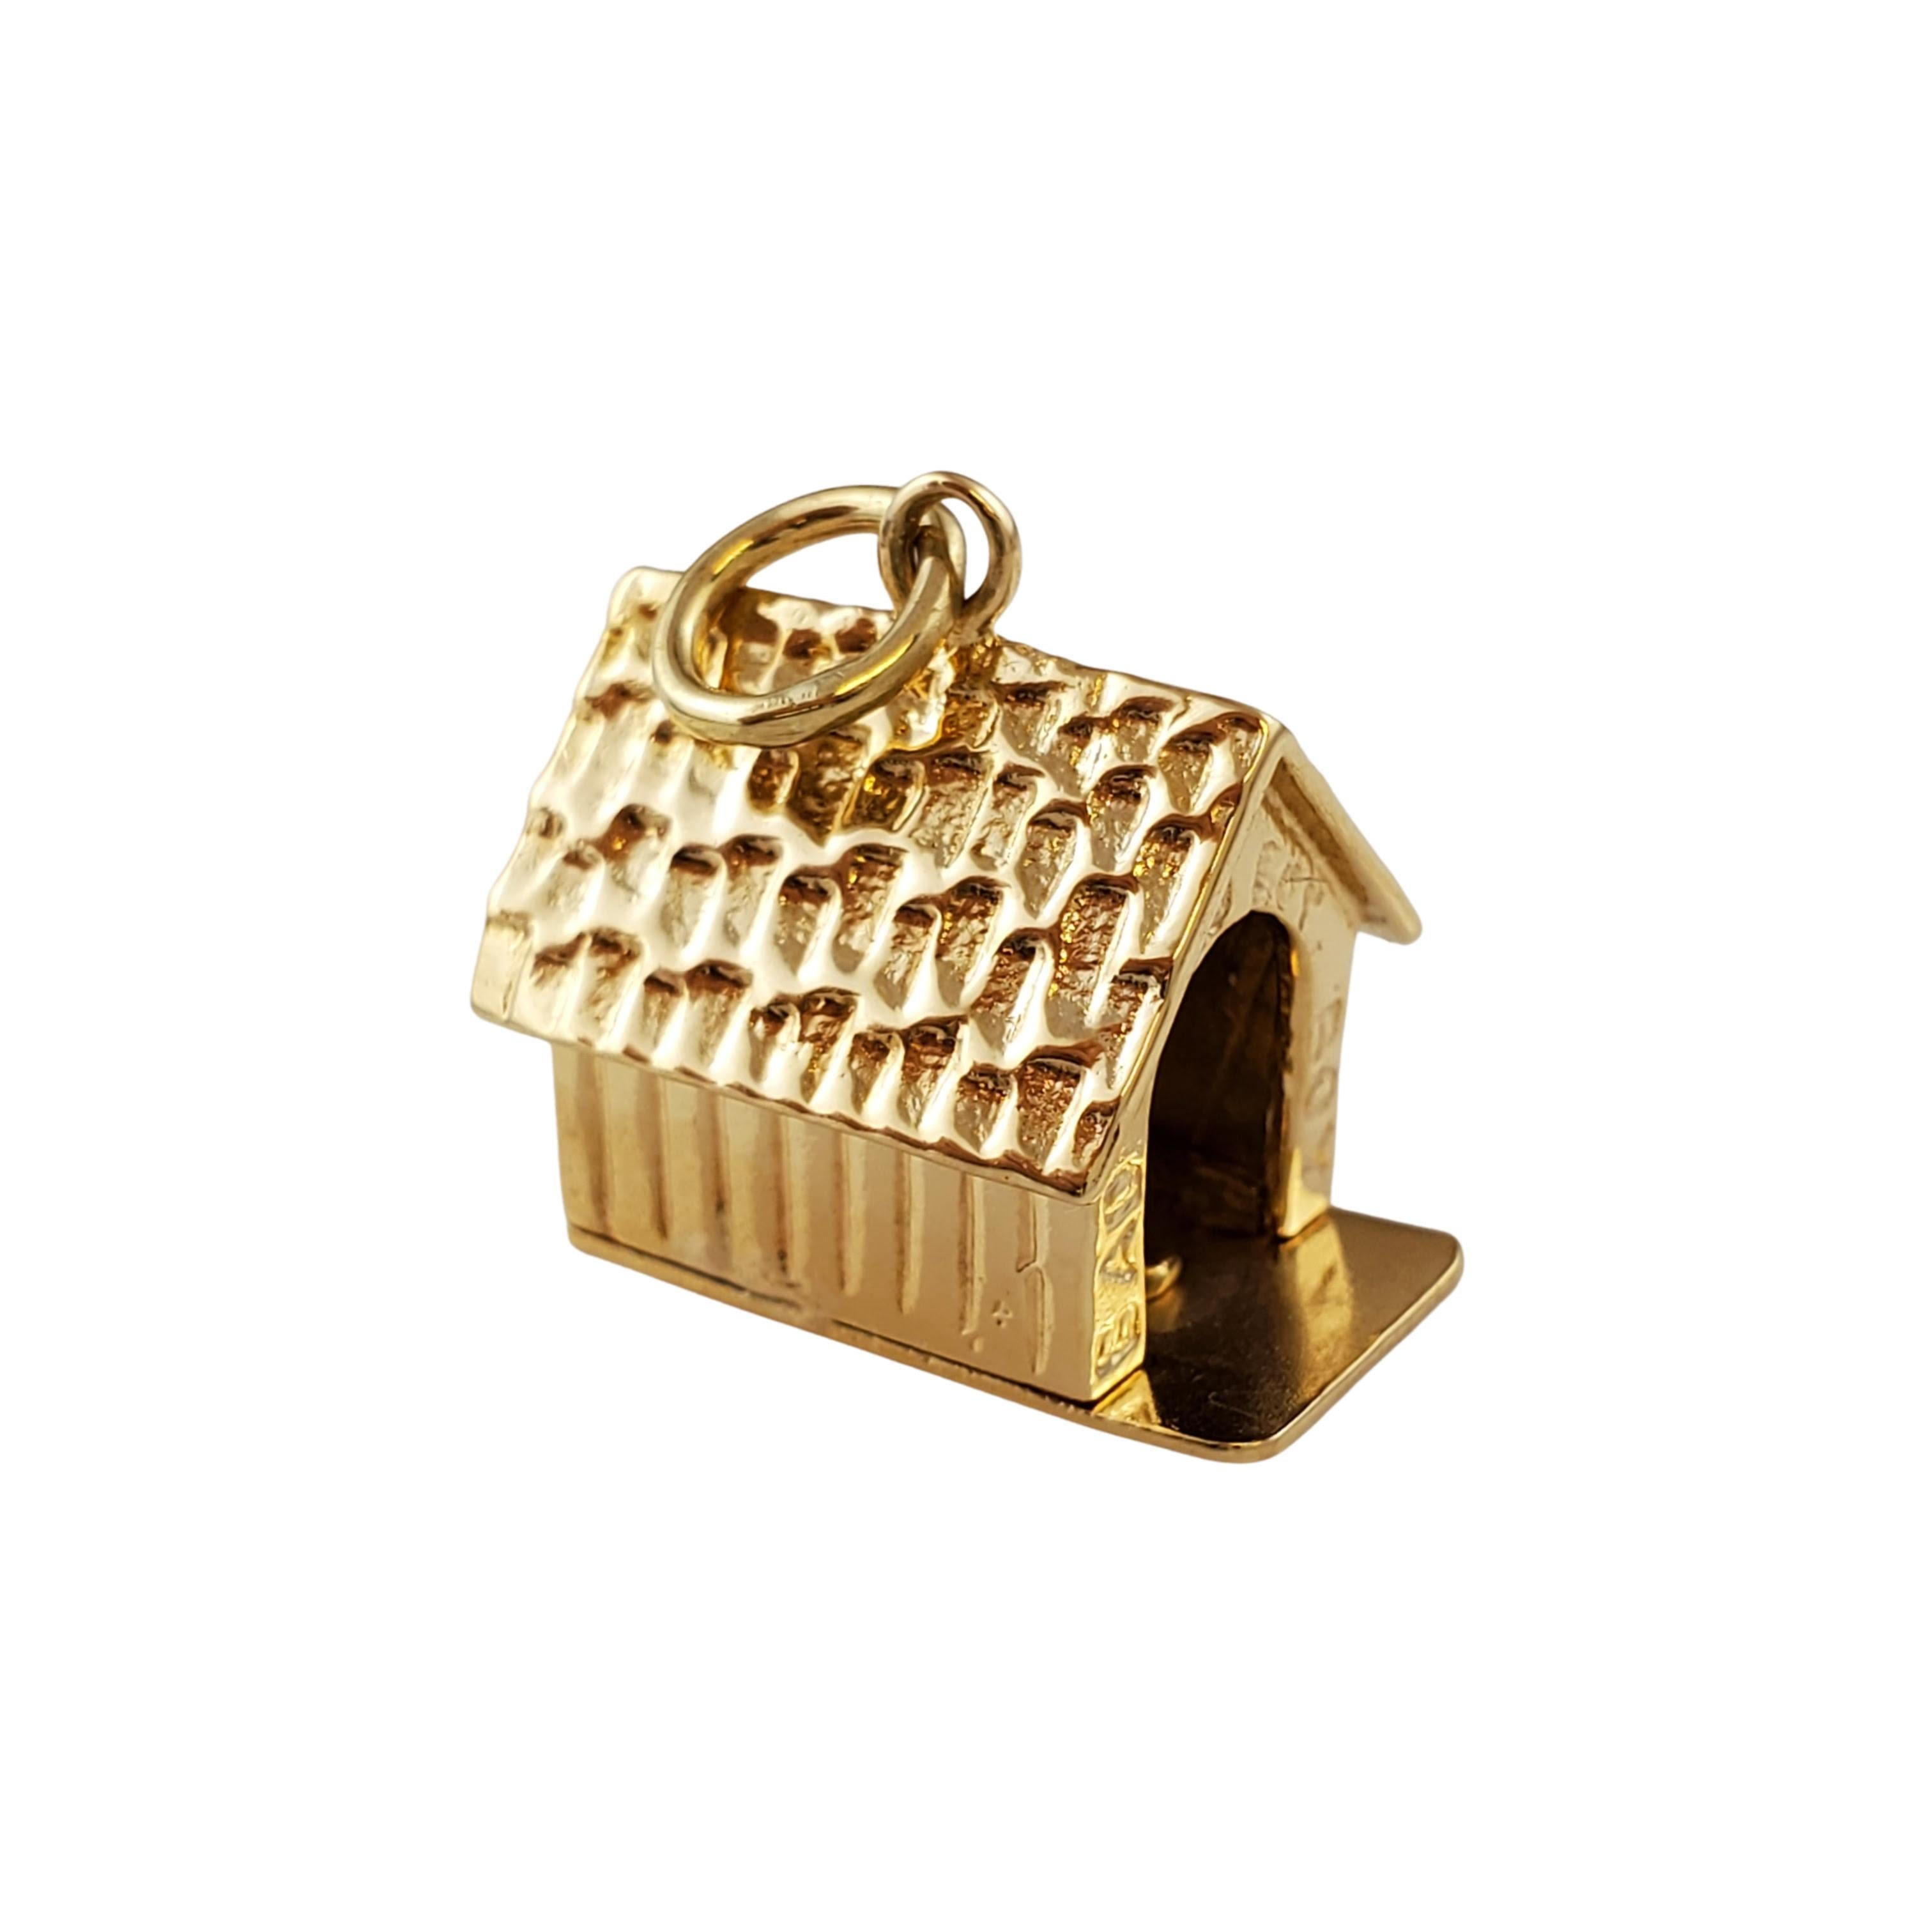 Vintage 14K Yellow Gold Dog in the Doghouse Charm

This 14k yellow gold charm is a doghouse with what appears to be a husband in the doghouse! Engraved around the door way of this doghouse states 